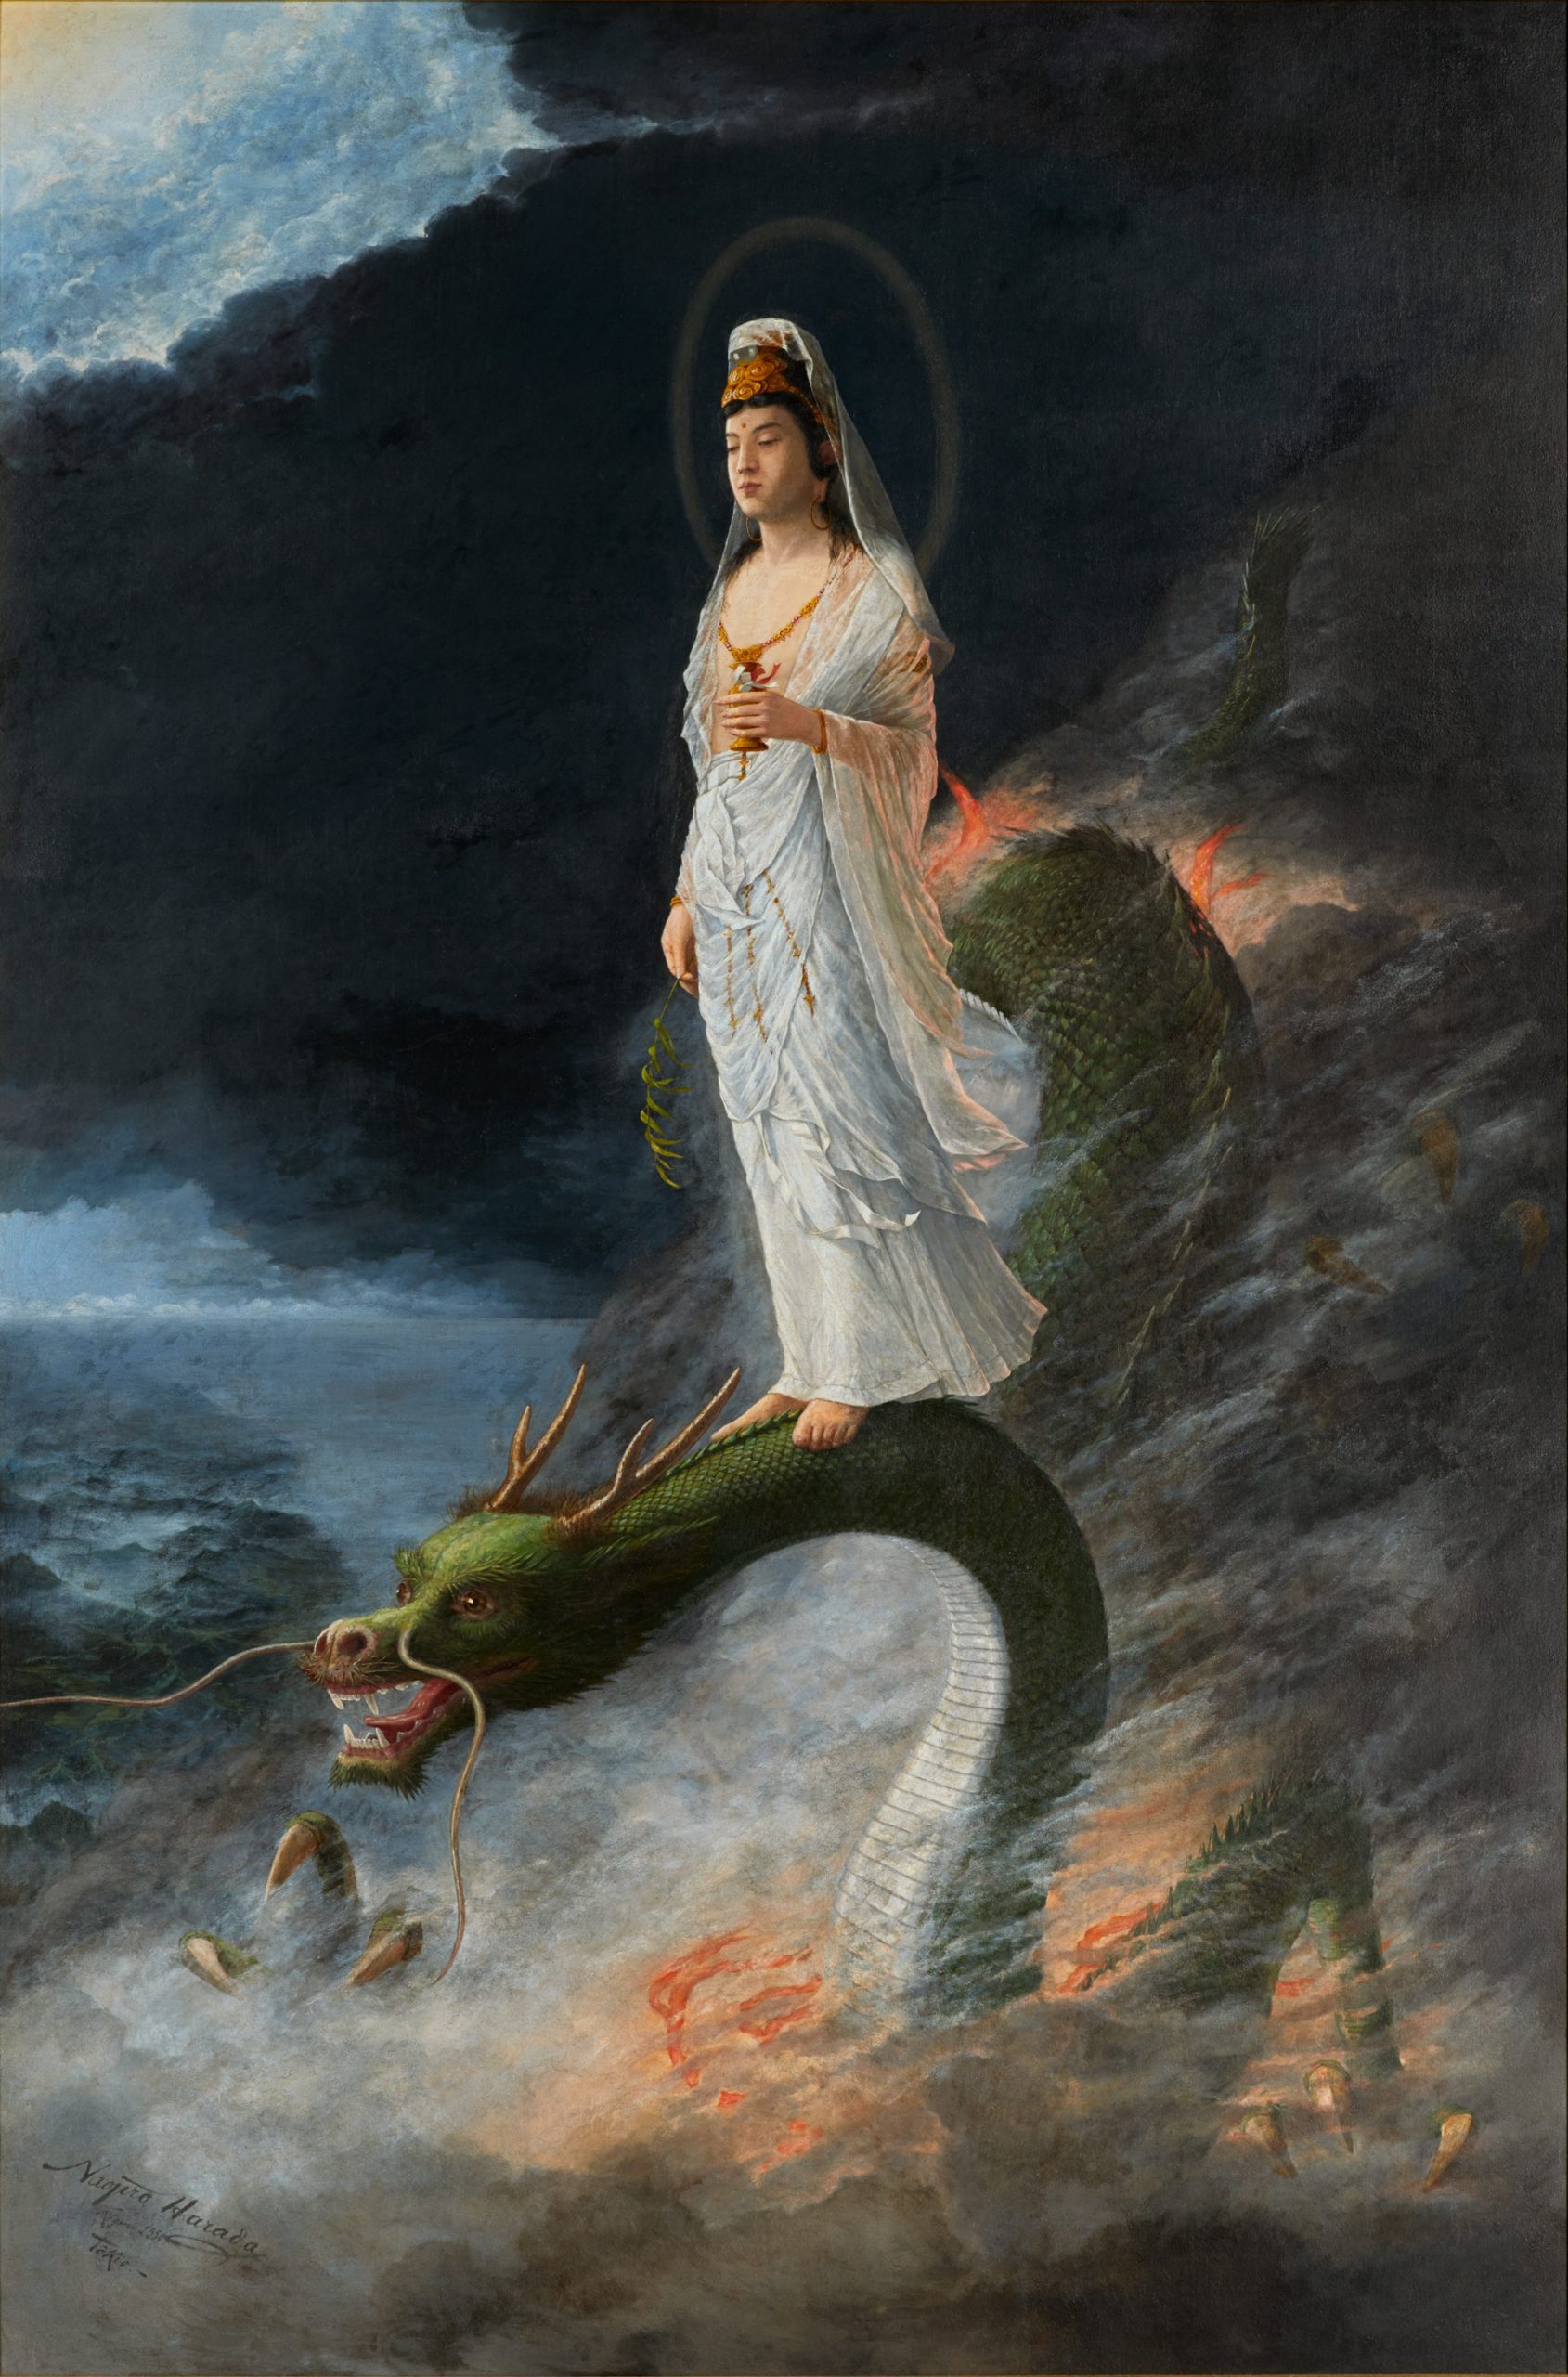 A woman stands on a dragon in a landscape of waves and mountains.